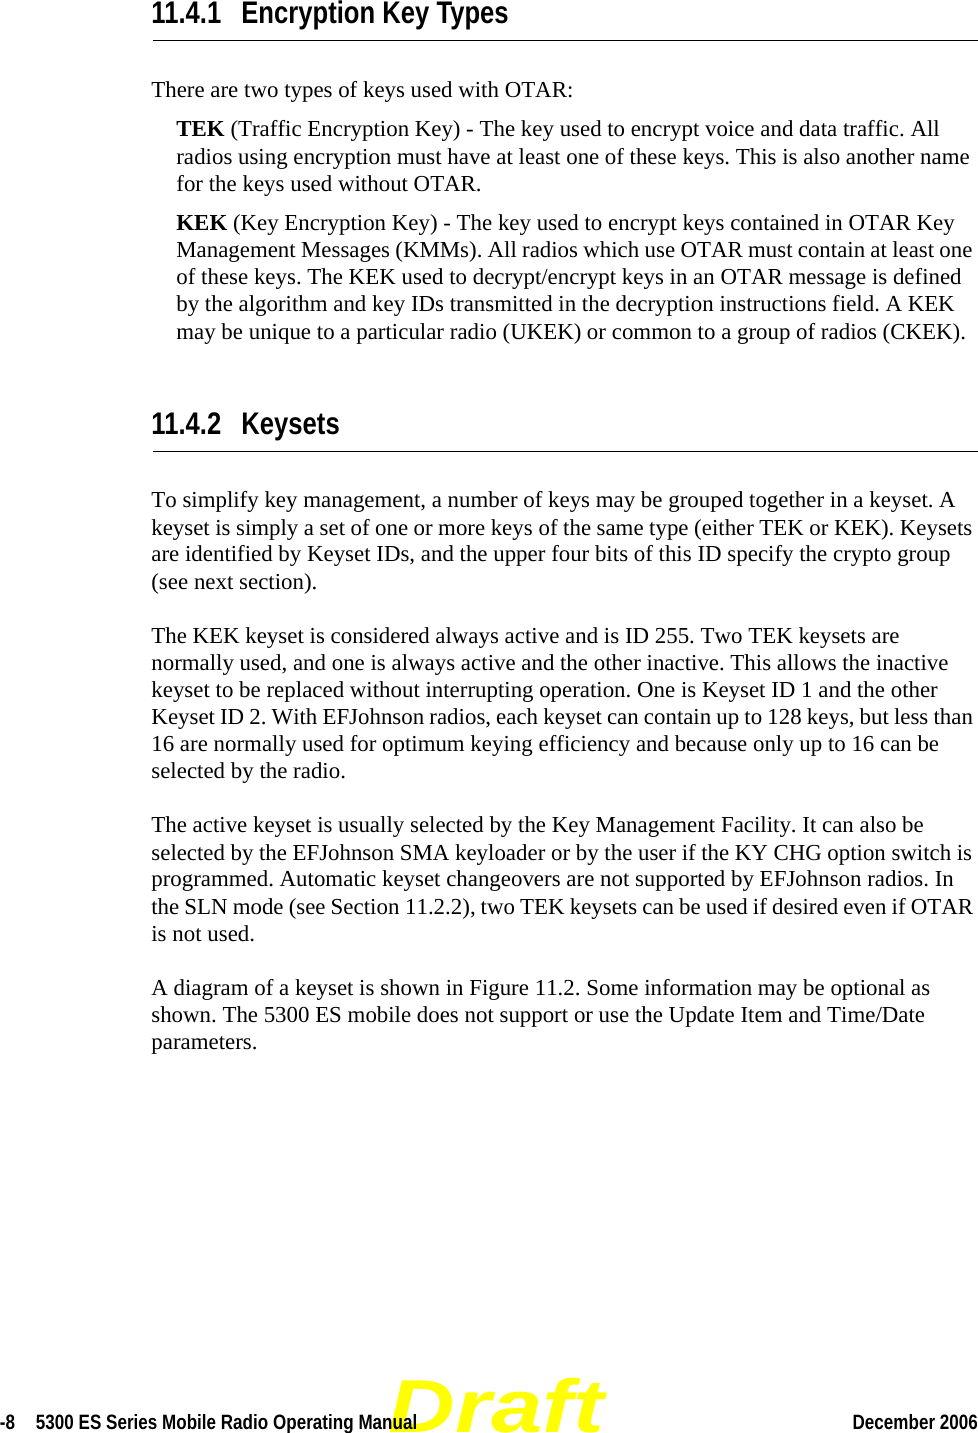 Draft-8  5300 ES Series Mobile Radio Operating Manual December 2006 11.4.1 Encryption Key TypesThere are two types of keys used with OTAR:TEK (Traffic Encryption Key) - The key used to encrypt voice and data traffic. All radios using encryption must have at least one of these keys. This is also another name for the keys used without OTAR.KEK (Key Encryption Key) - The key used to encrypt keys contained in OTAR Key Management Messages (KMMs). All radios which use OTAR must contain at least one of these keys. The KEK used to decrypt/encrypt keys in an OTAR message is defined by the algorithm and key IDs transmitted in the decryption instructions field. A KEK may be unique to a particular radio (UKEK) or common to a group of radios (CKEK).11.4.2 KeysetsTo simplify key management, a number of keys may be grouped together in a keyset. A keyset is simply a set of one or more keys of the same type (either TEK or KEK). Keysets are identified by Keyset IDs, and the upper four bits of this ID specify the crypto group (see next section).The KEK keyset is considered always active and is ID 255. Two TEK keysets are normally used, and one is always active and the other inactive. This allows the inactive keyset to be replaced without interrupting operation. One is Keyset ID 1 and the other Keyset ID 2. With EFJohnson radios, each keyset can contain up to 128 keys, but less than 16 are normally used for optimum keying efficiency and because only up to 16 can be selected by the radio.The active keyset is usually selected by the Key Management Facility. It can also be selected by the EFJohnson SMA keyloader or by the user if the KY CHG option switch is programmed. Automatic keyset changeovers are not supported by EFJohnson radios. In the SLN mode (see Section 11.2.2), two TEK keysets can be used if desired even if OTAR is not used.A diagram of a keyset is shown in Figure 11.2. Some information may be optional as shown. The 5300 ES mobile does not support or use the Update Item and Time/Date parameters.